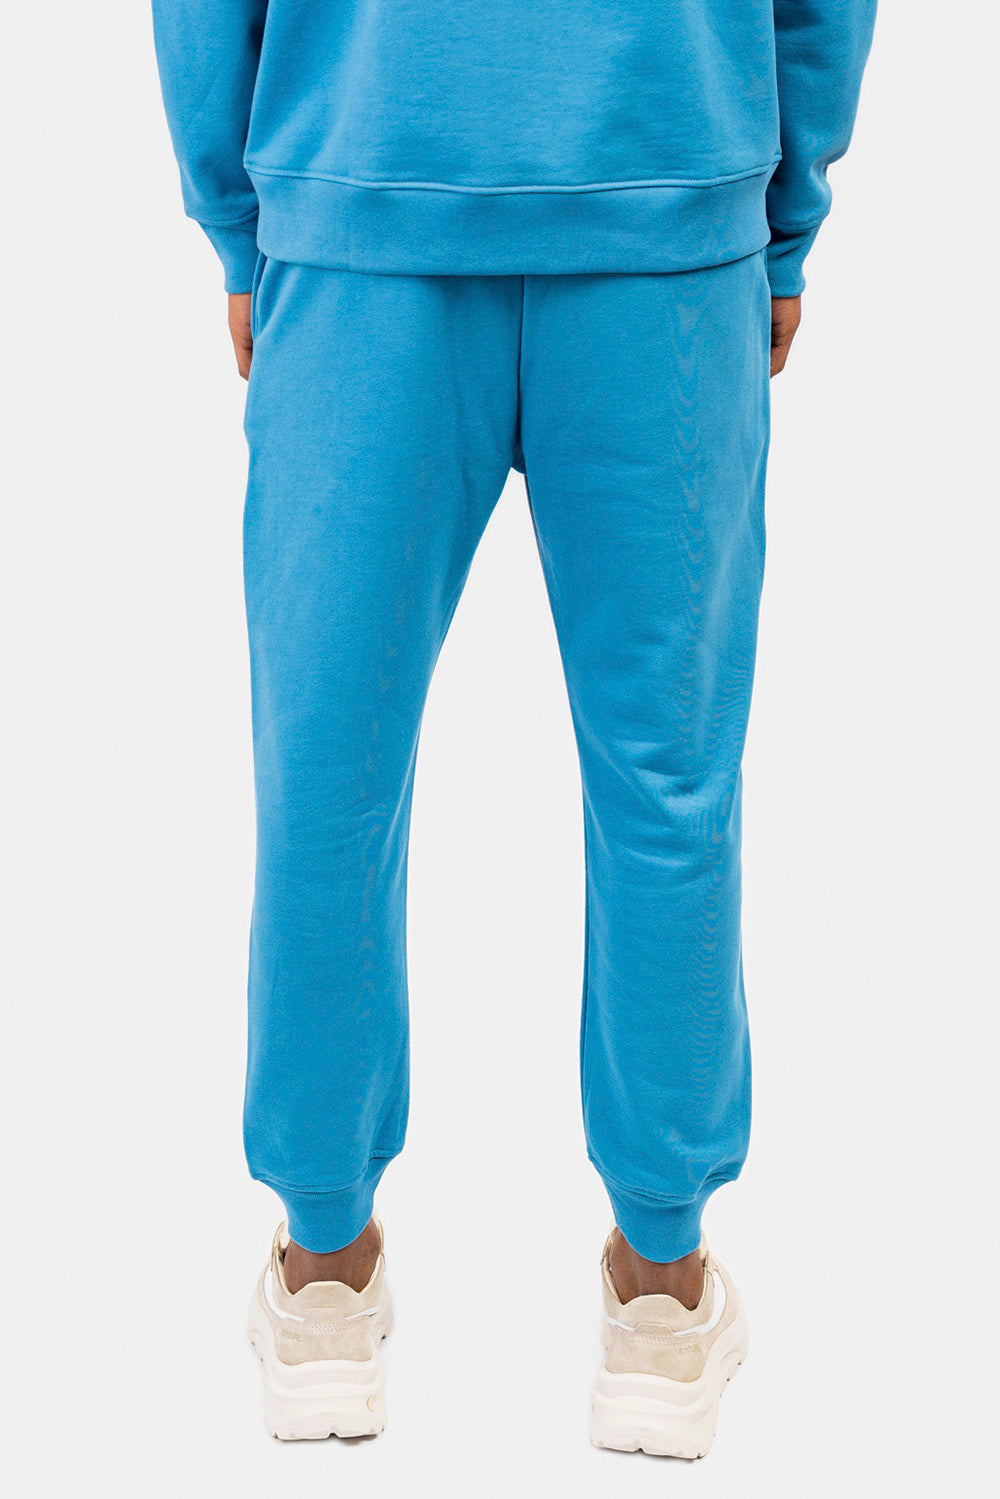 Classic Embroidery Heart Sweatpants